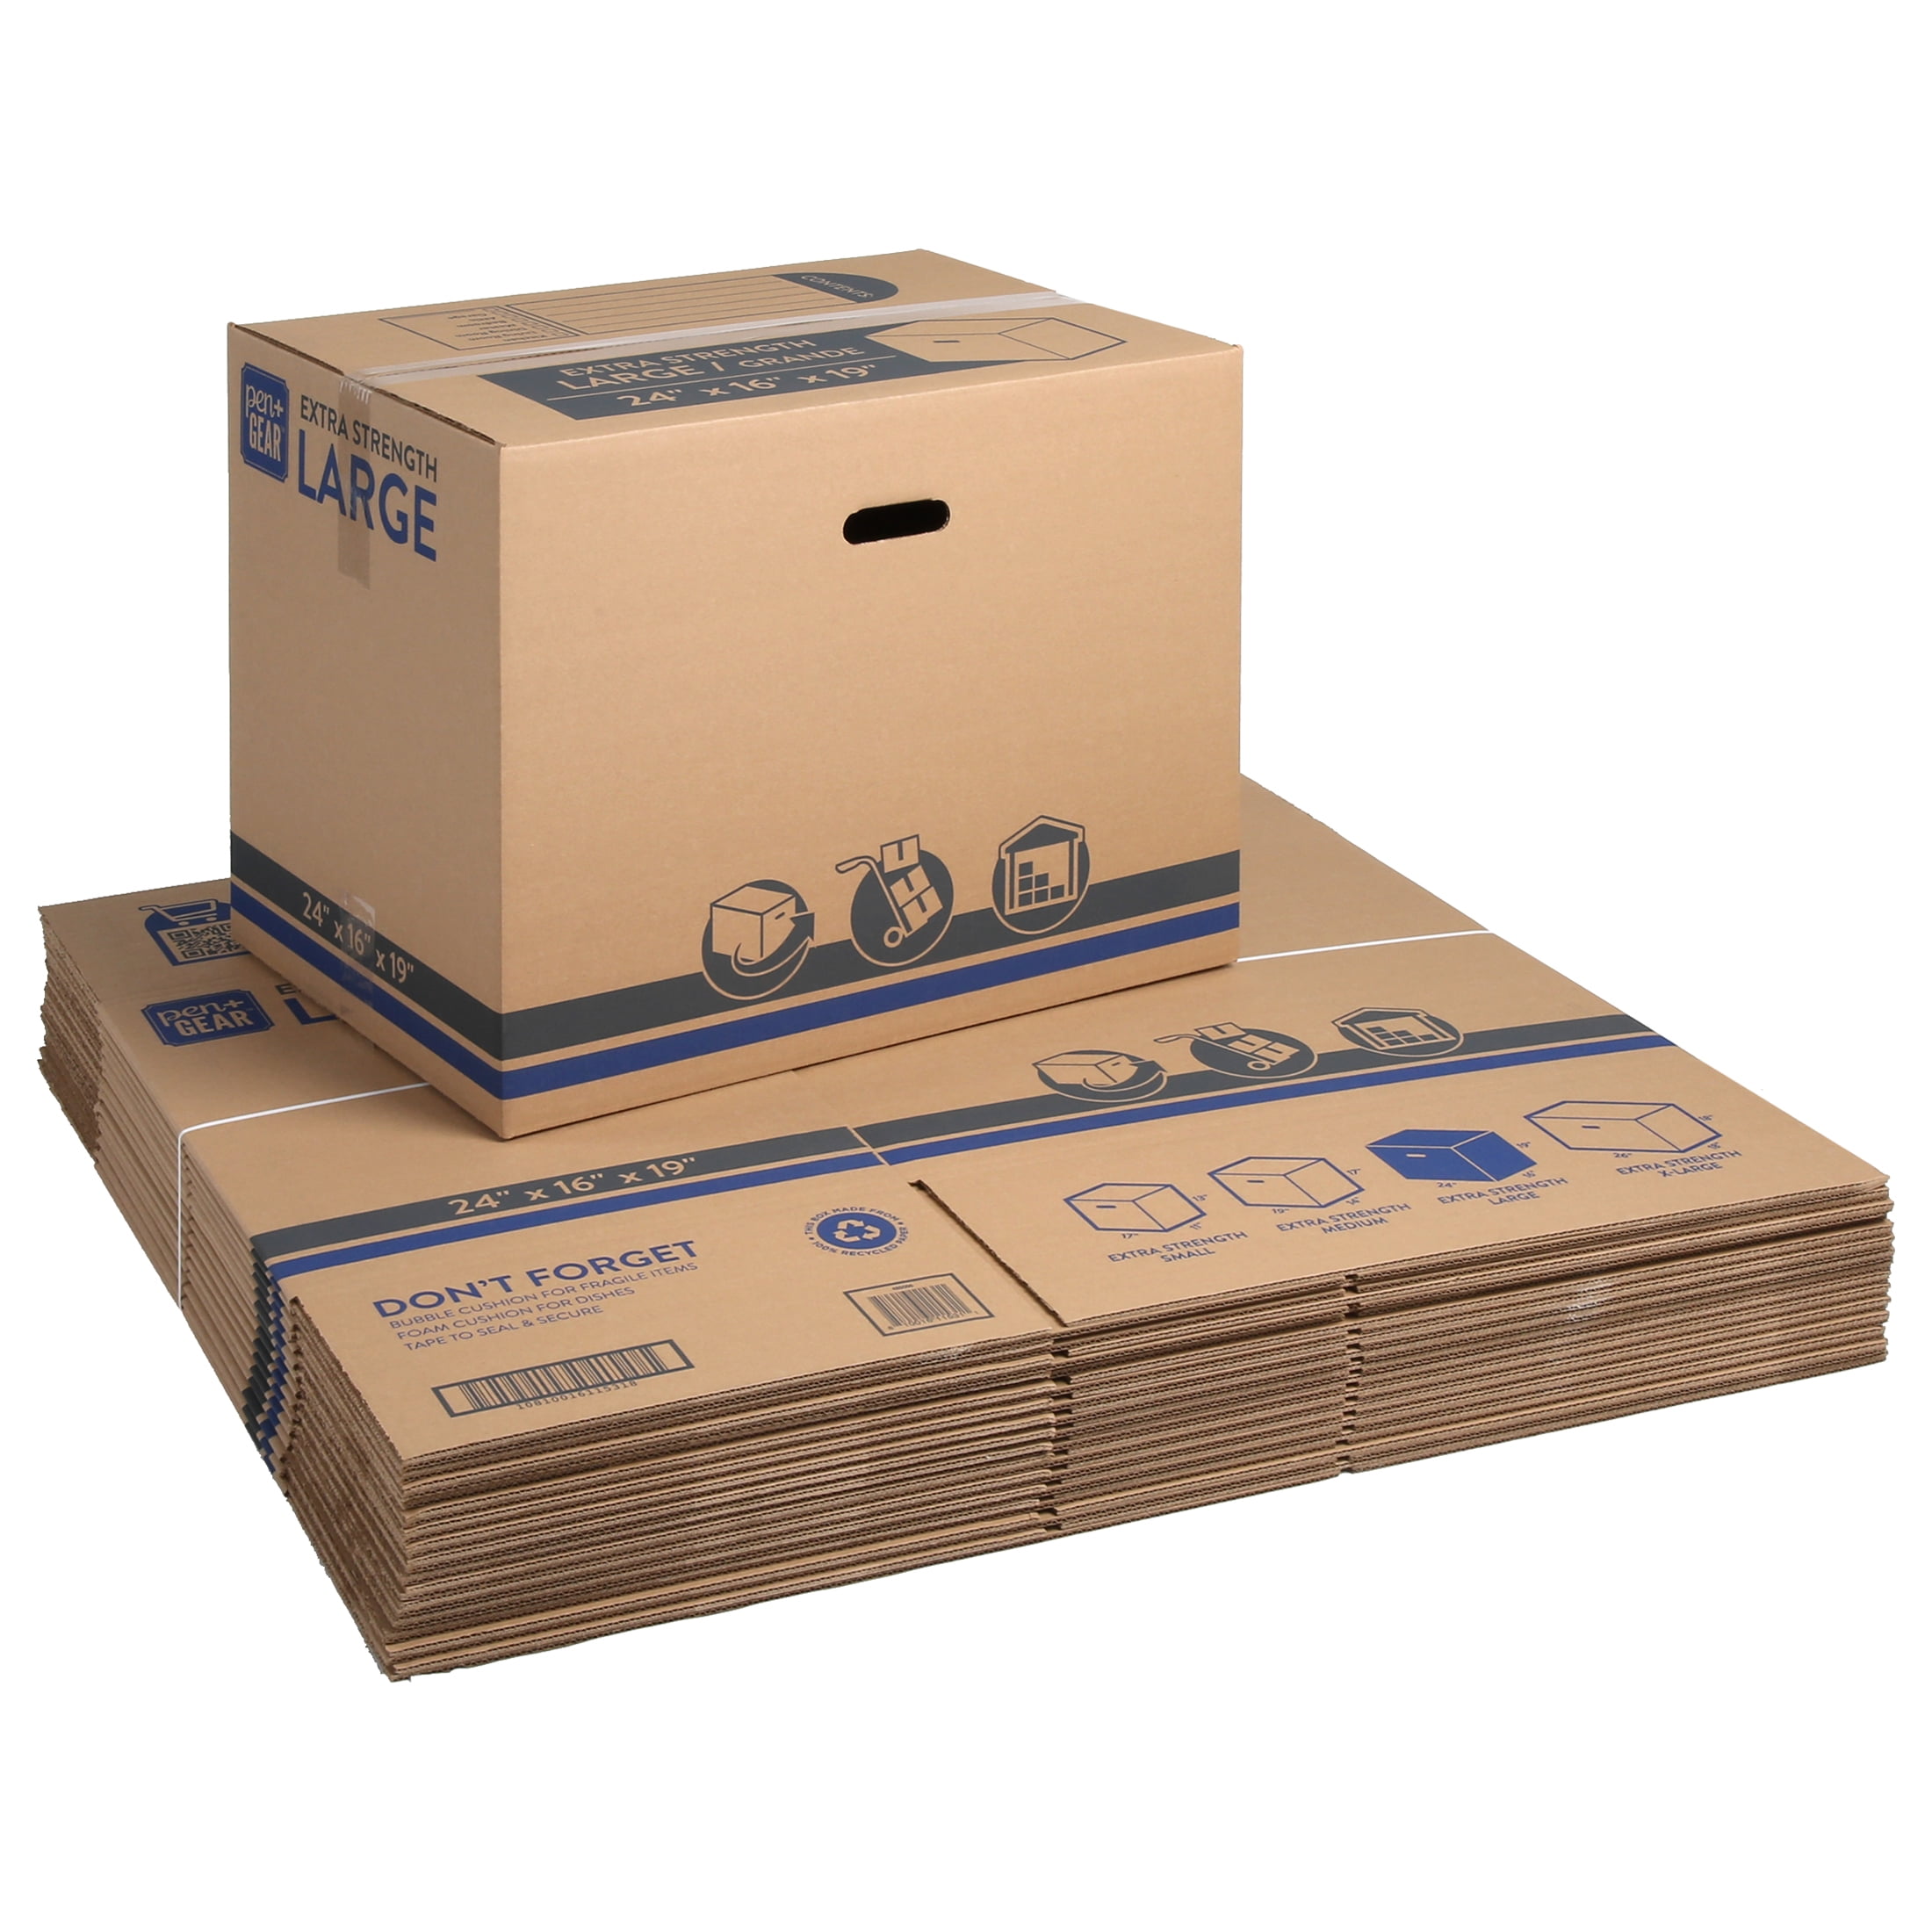 Packing and Moving Pack of 25 for Shipping Kraft Aviditi 884 Flat Corrugated Cardboard Box 8 L x 8 W x 4 H 